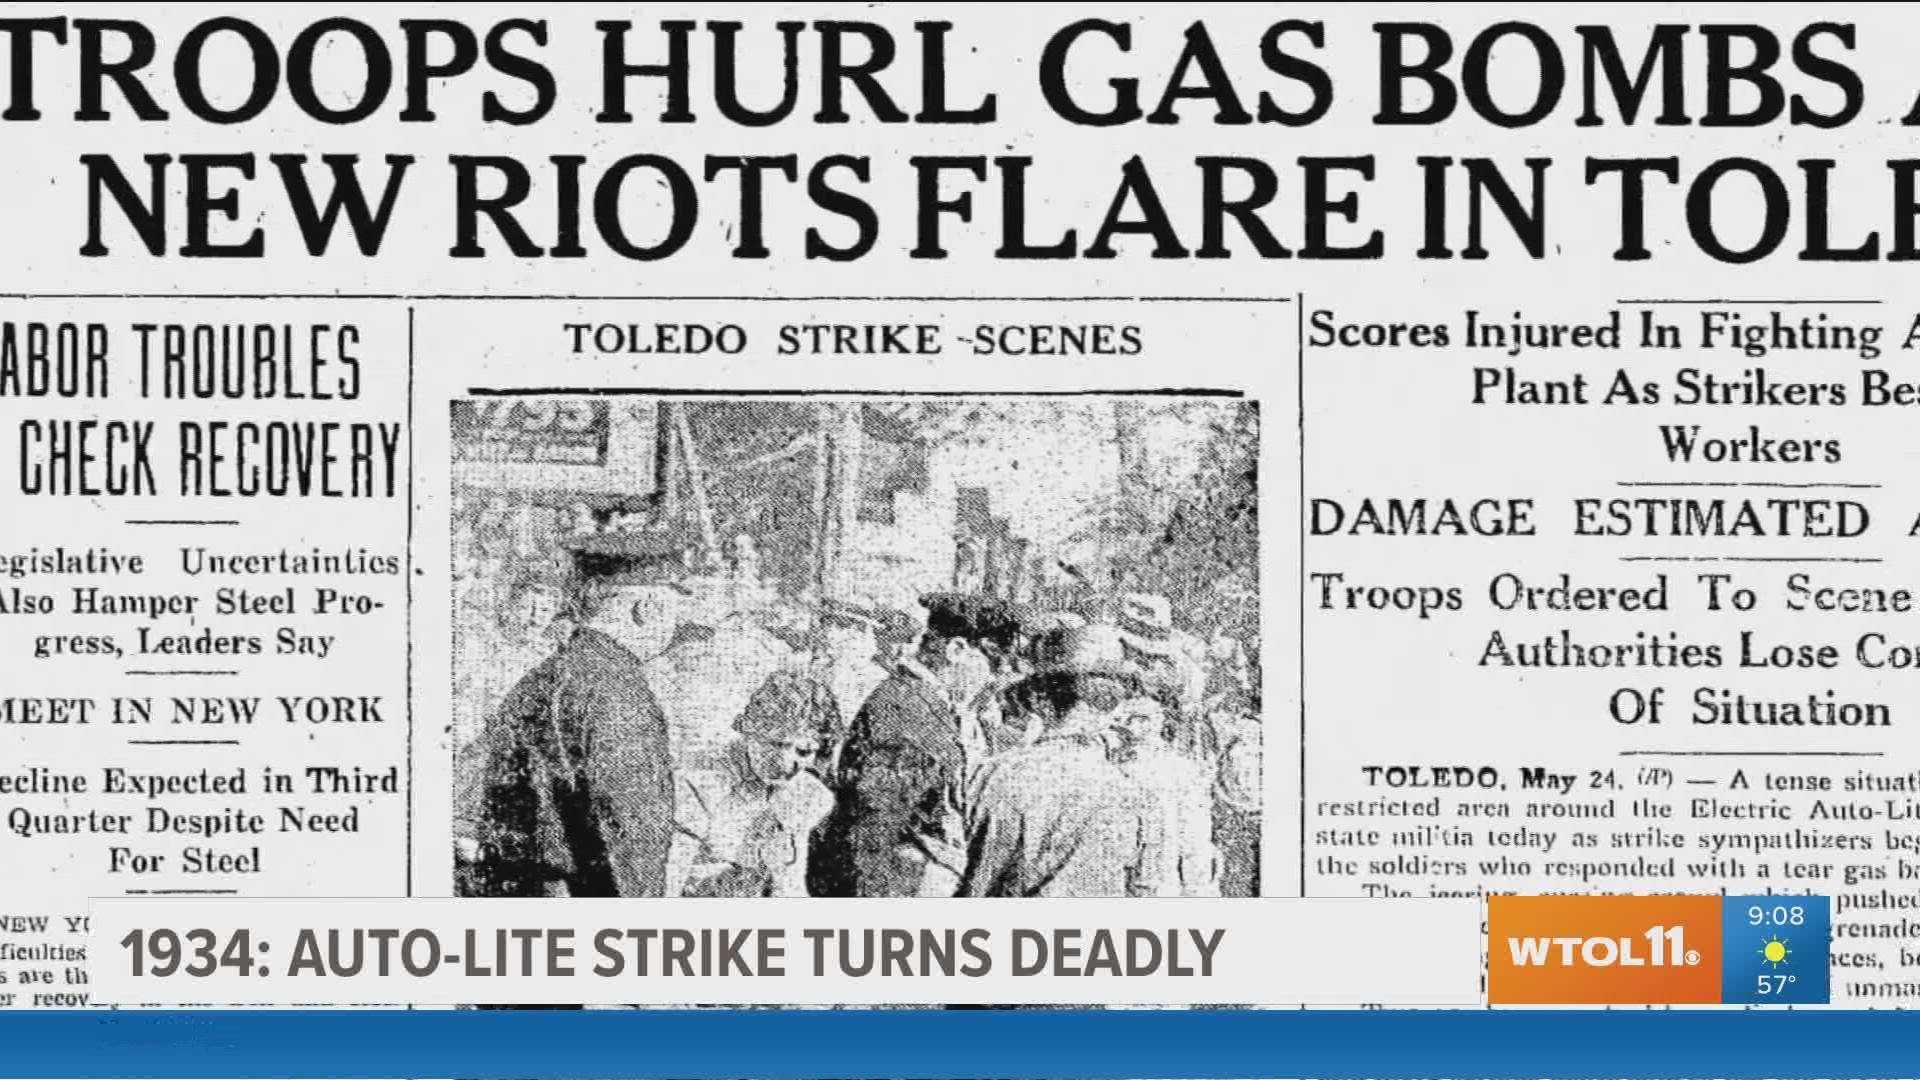 On May 24, 1934, National Guard troops fired into a crowd of protestors in front of Toledo's Auto-Lite factory. Here's what else happened today in Toledo history.